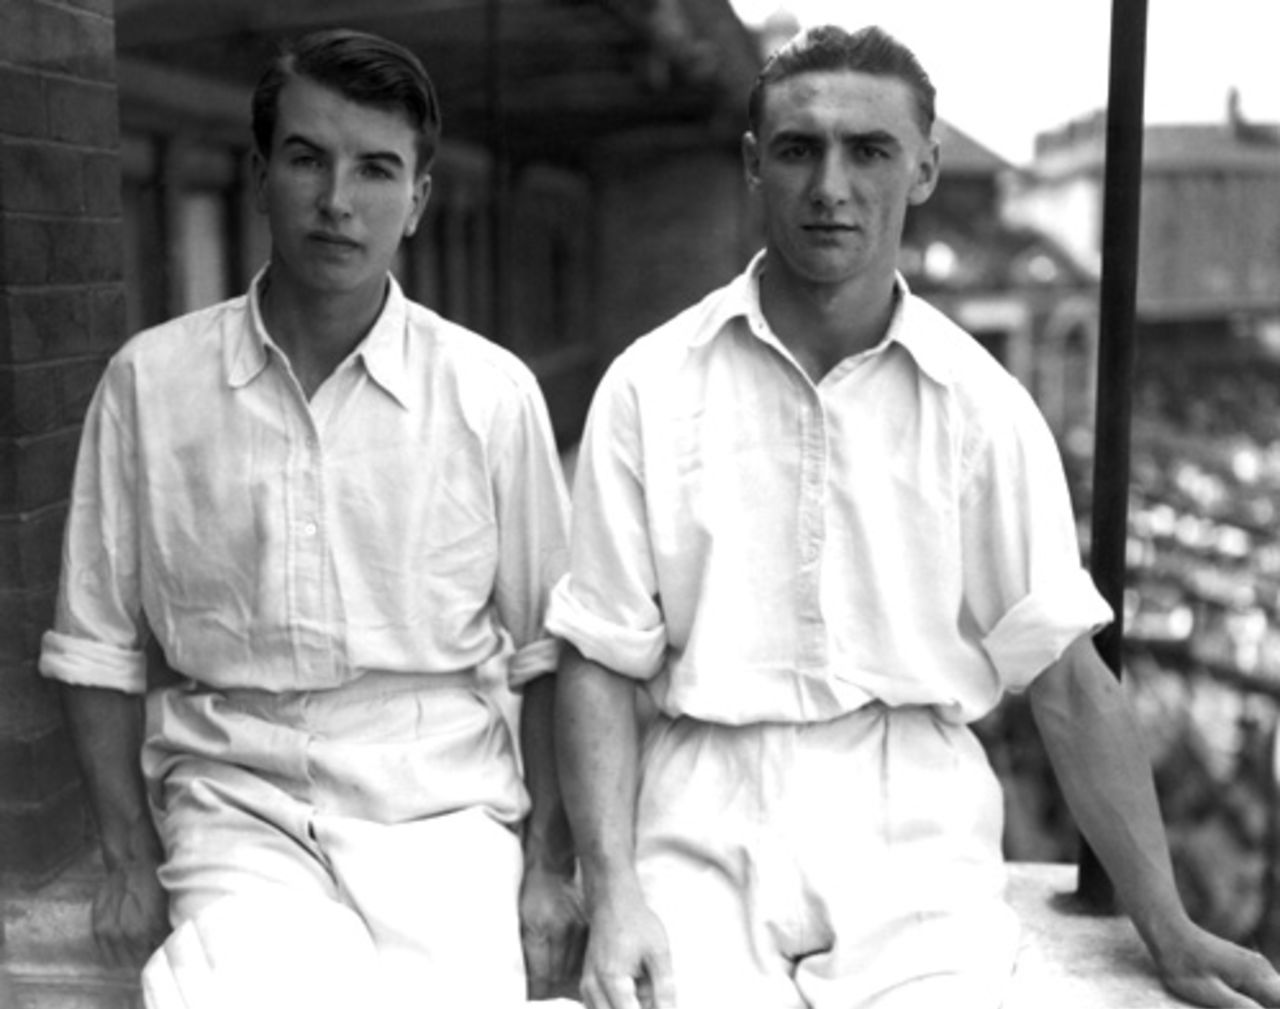 Yorkshire cricketers Geoffrey Keighley and Gerald Smithson, 1947